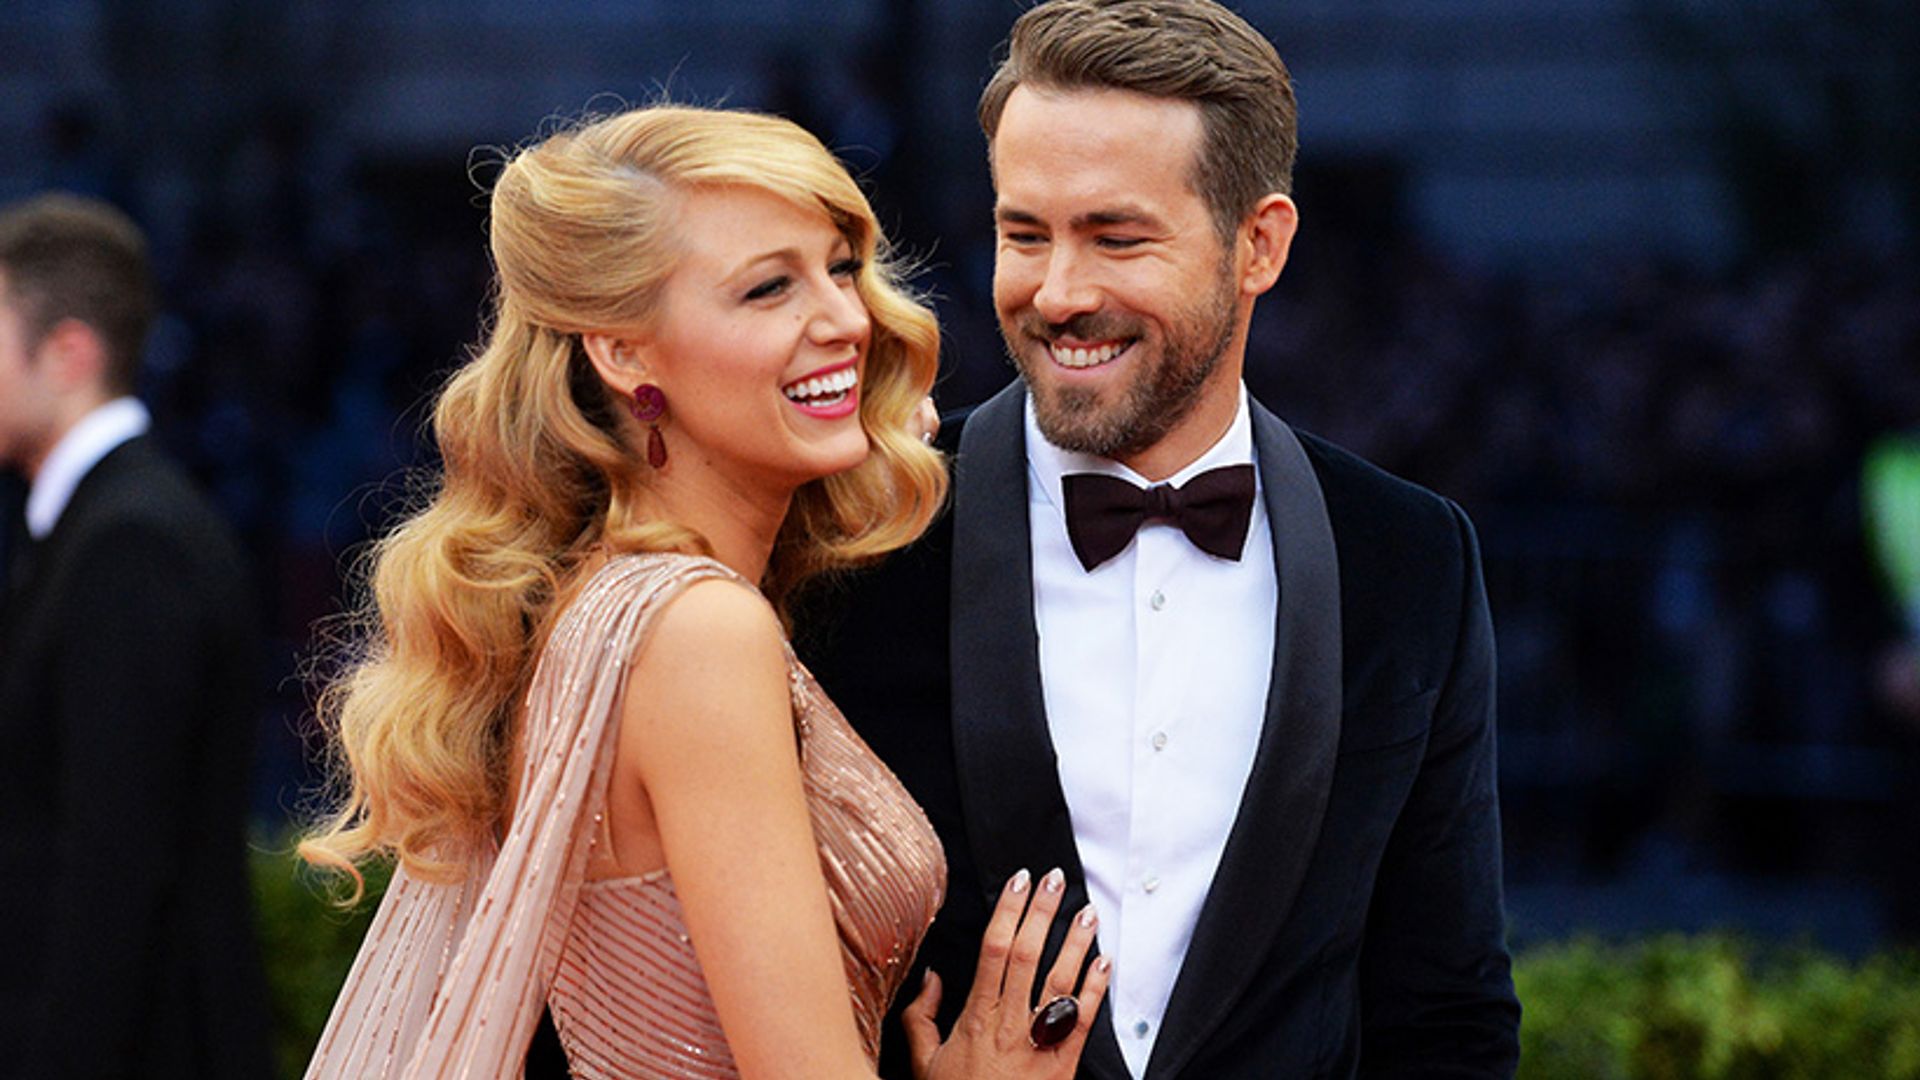 Celebrity couples where the woman is older than the man